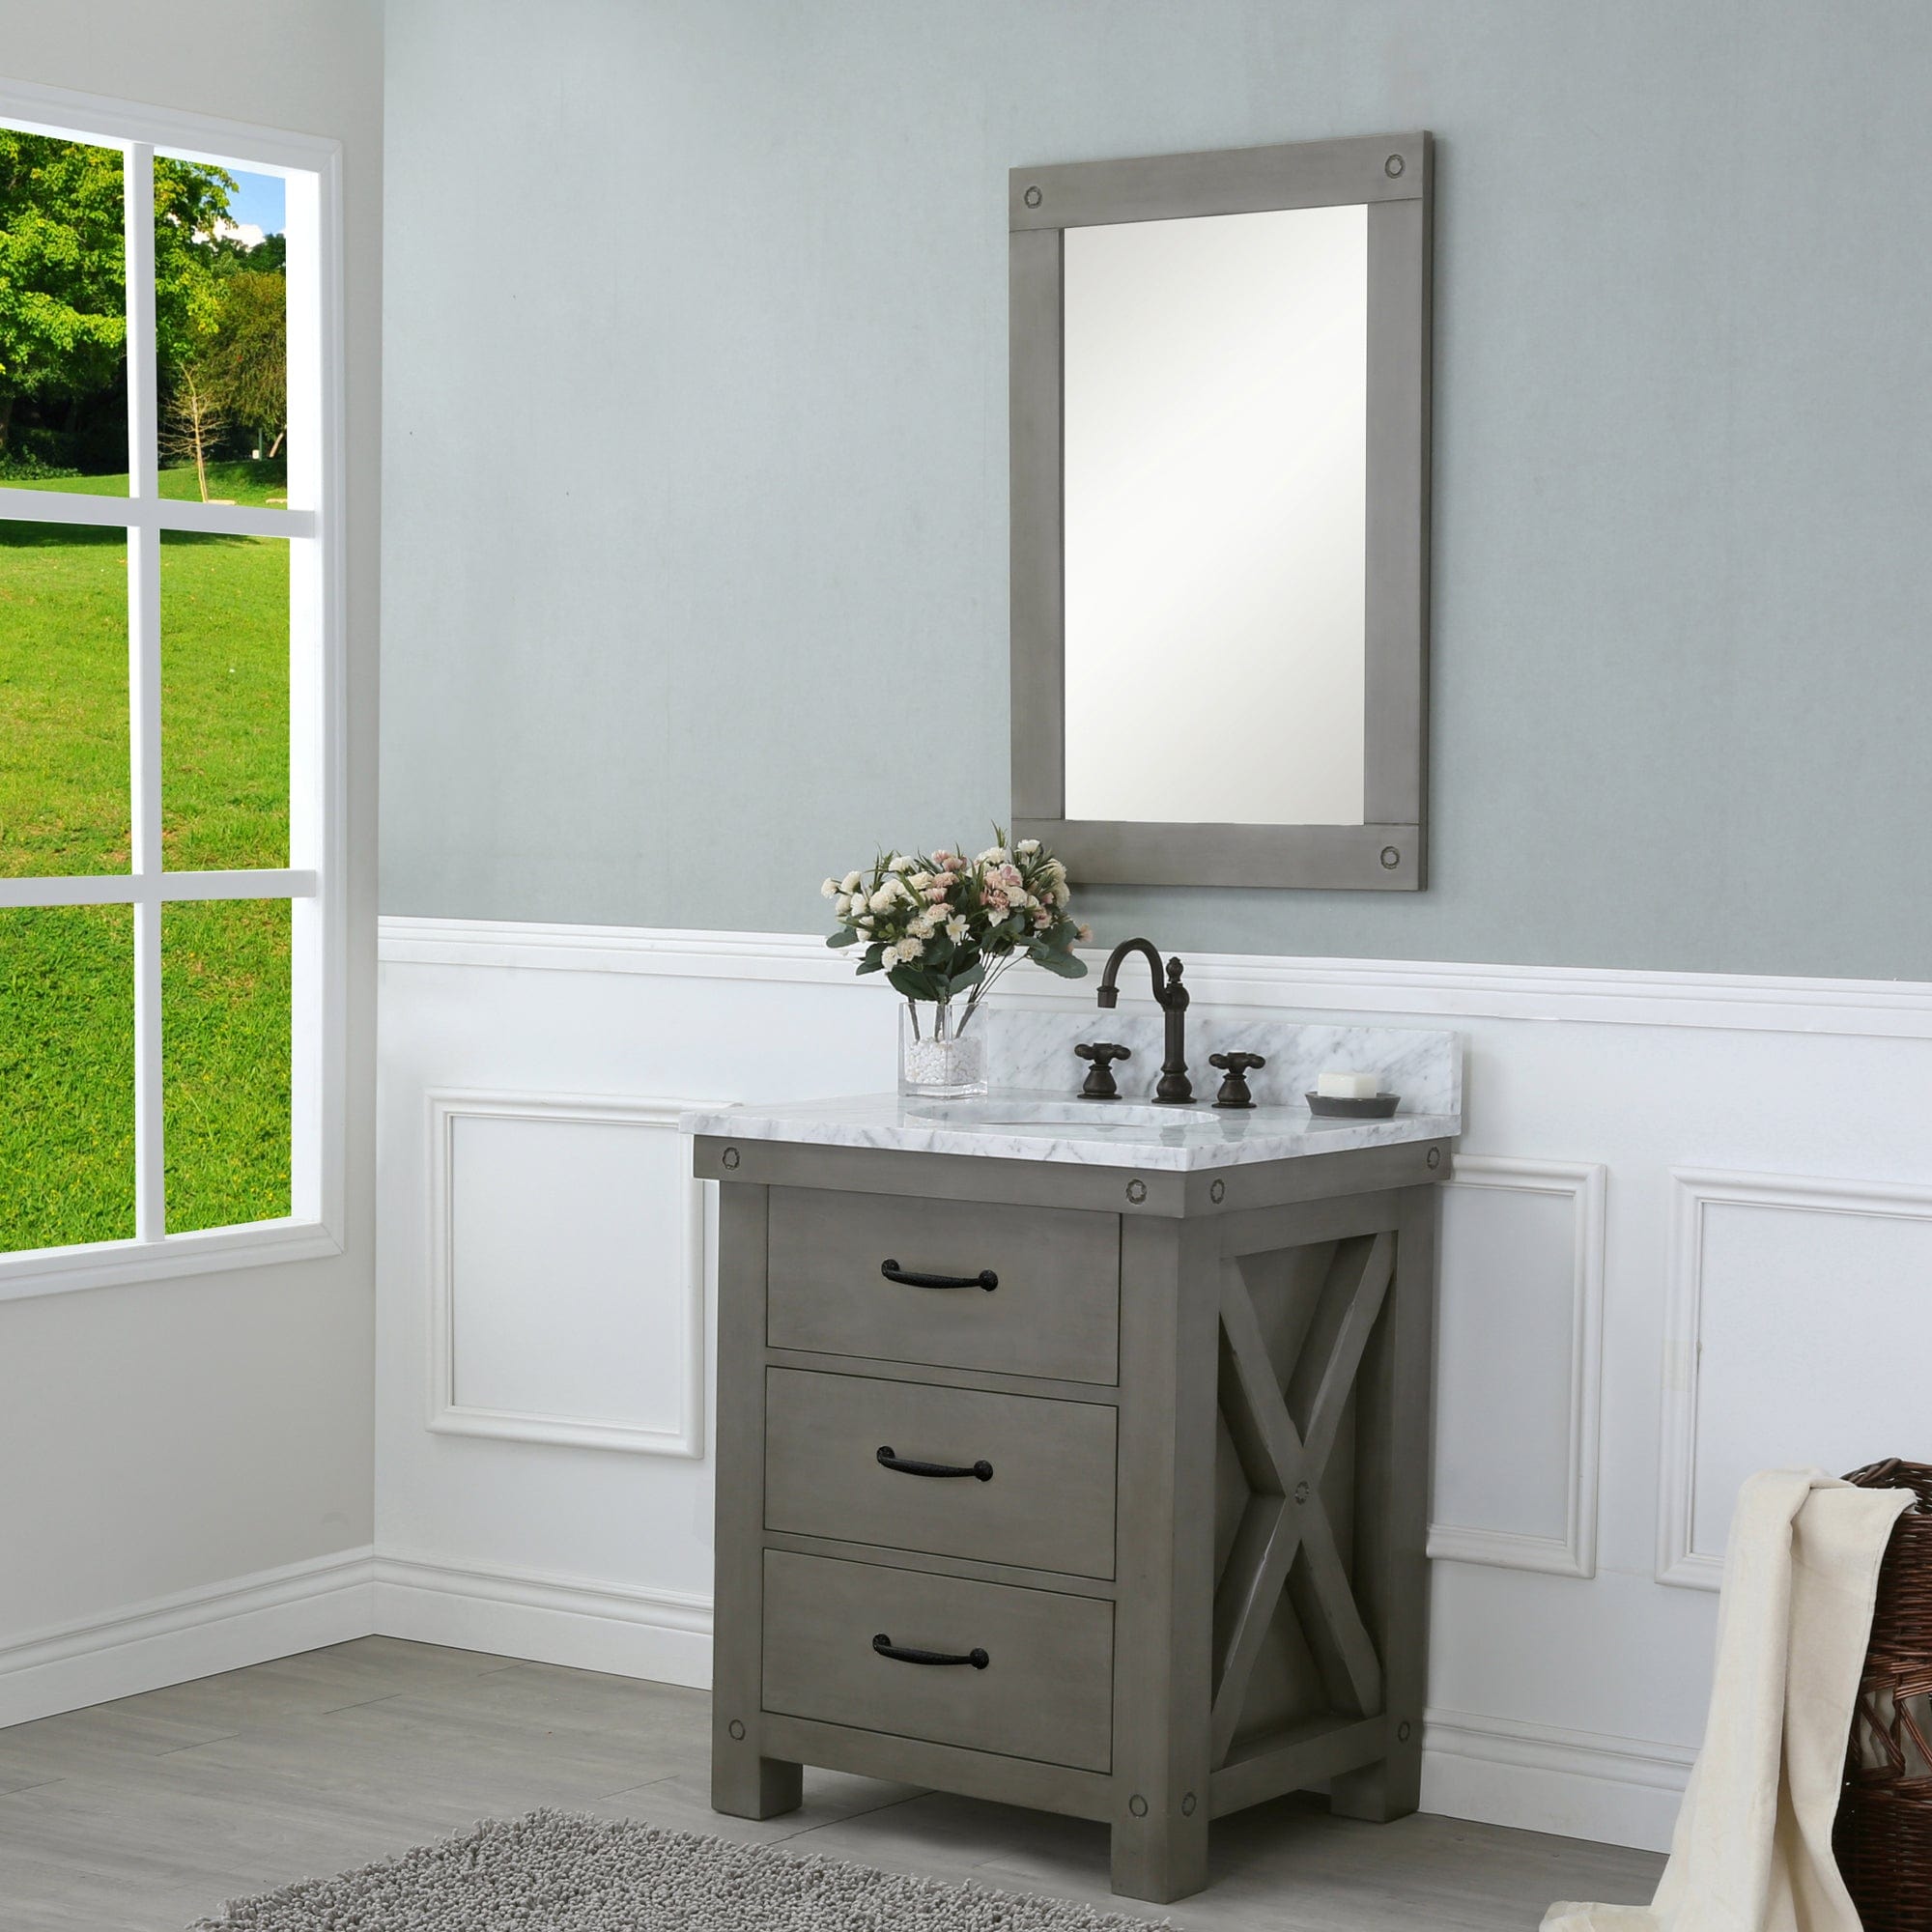 30 Inch Grizzle Grey Single Sink Bathroom Vanity With Mirror And Faucet With Carrara White Marble Counter Top From The ABERDEEN Collection - Molaix00732030749665Bathroom VanitiesAB30CW03GG-A24BX1203